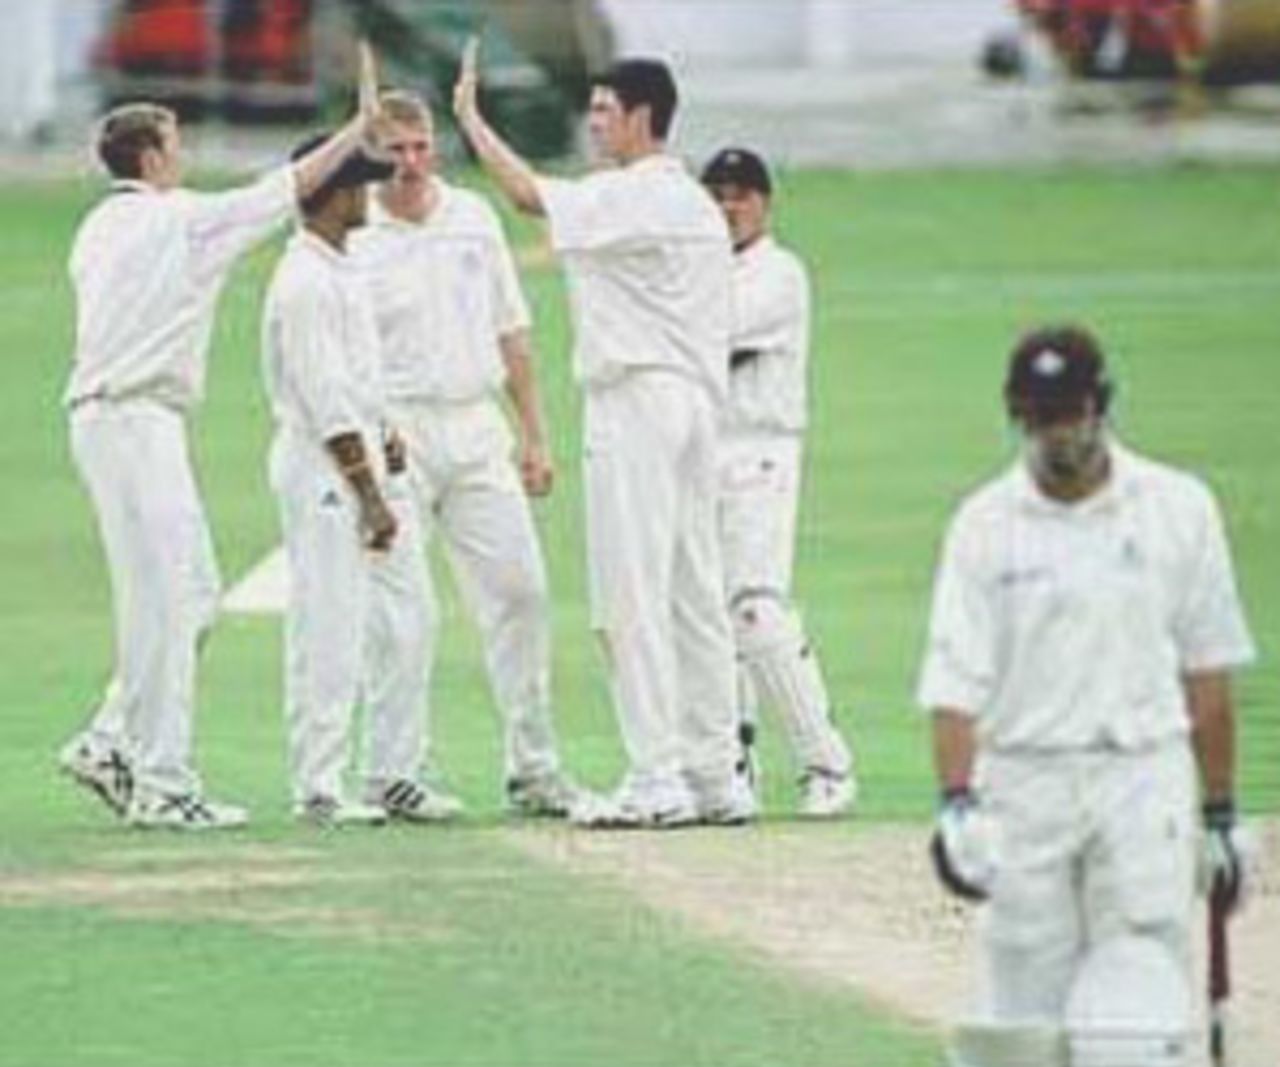 Smethurst congratulated by teammates, PPP healthcare County Championship Division One, 2000, Surrey v Lancashire, Kennington Oval, London, 02-05 August 2000(Day 2).